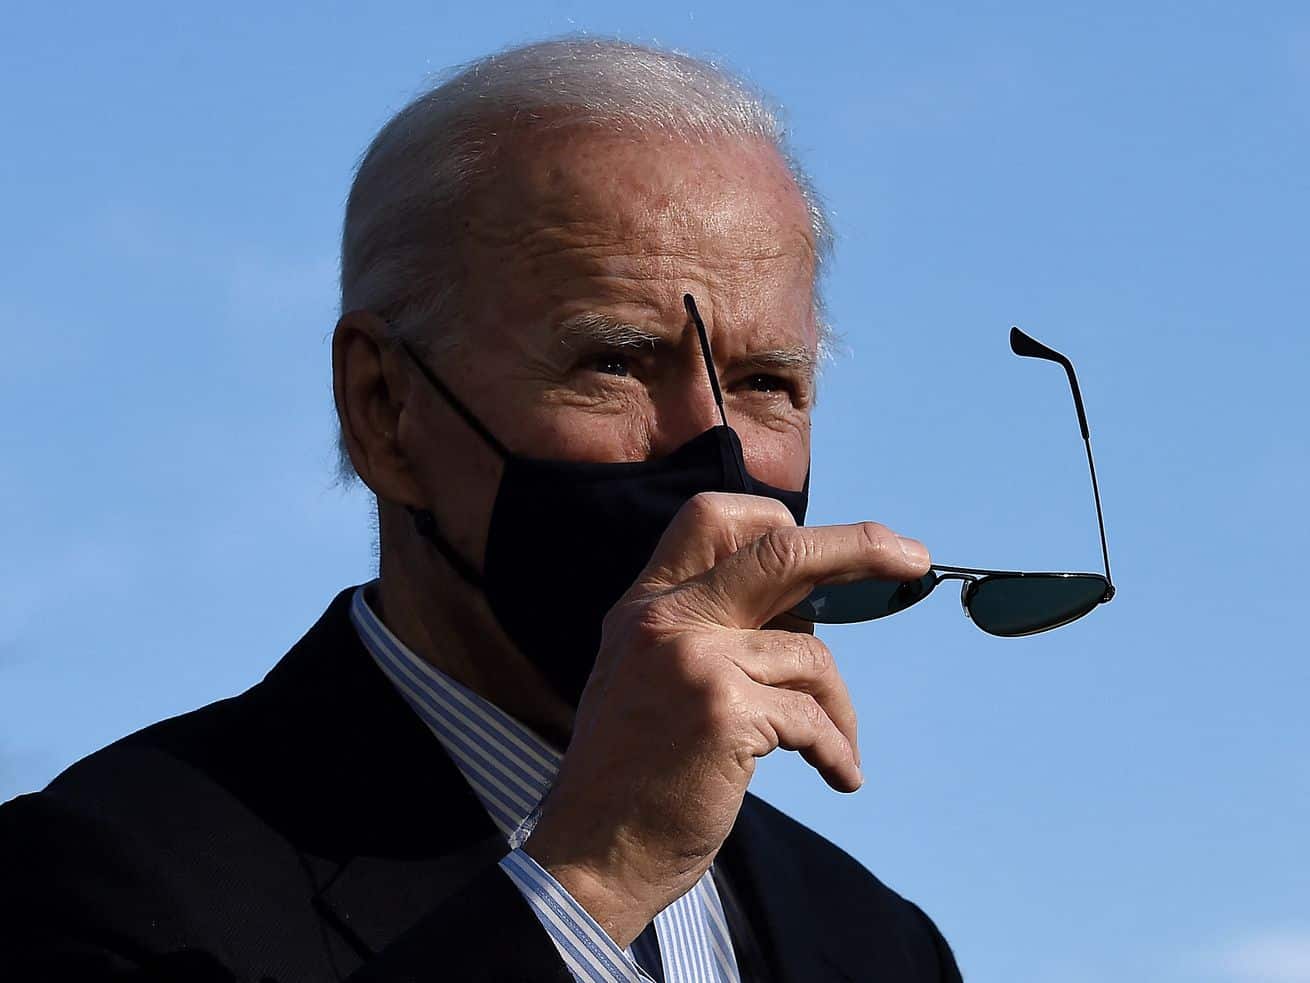 Polls: A majority of Americans feel good about Biden’s first 100 days